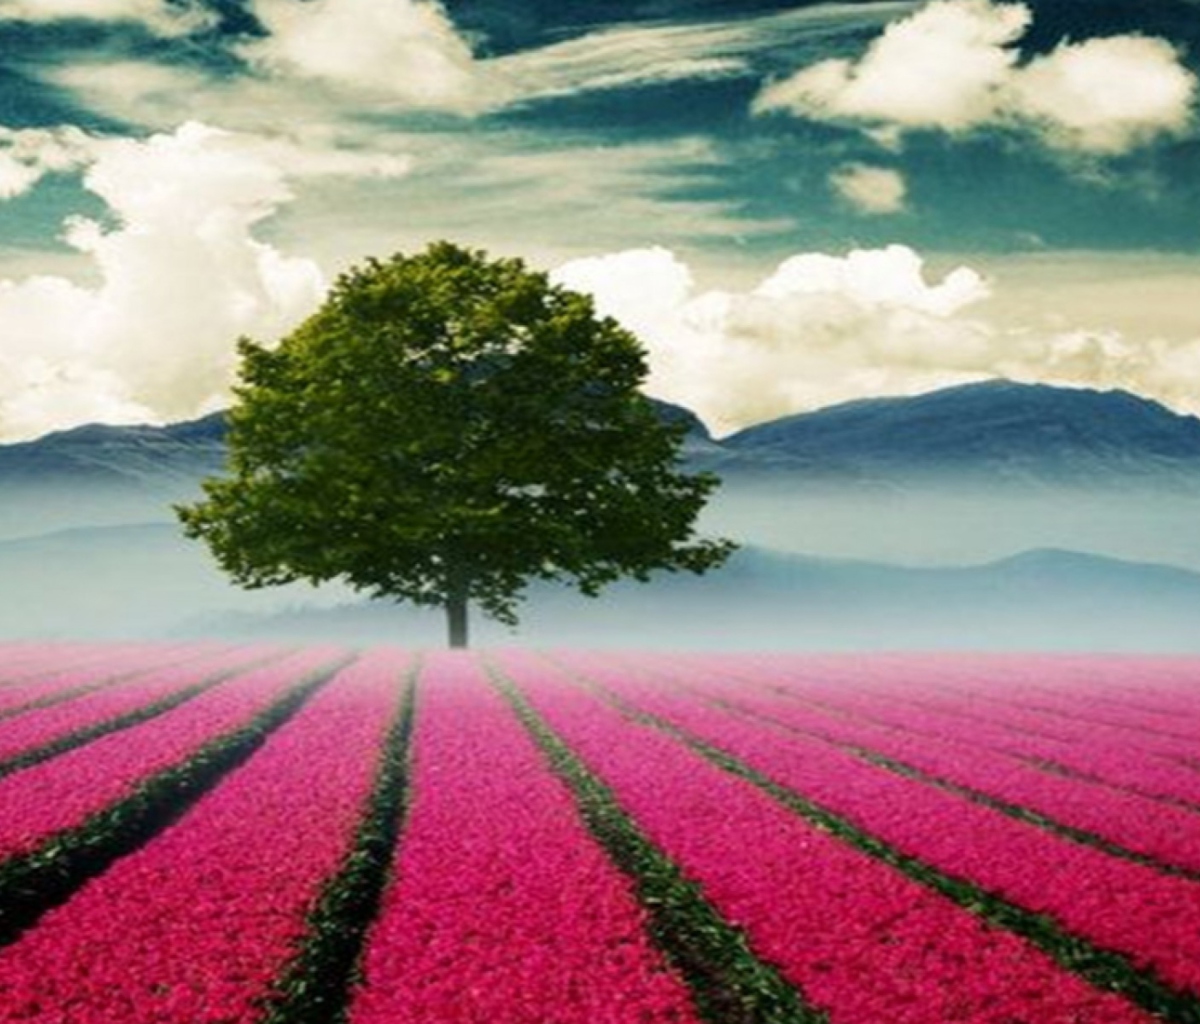 Beautiful Landscape With Tree And Pink Flower Field wallpaper 1200x1024